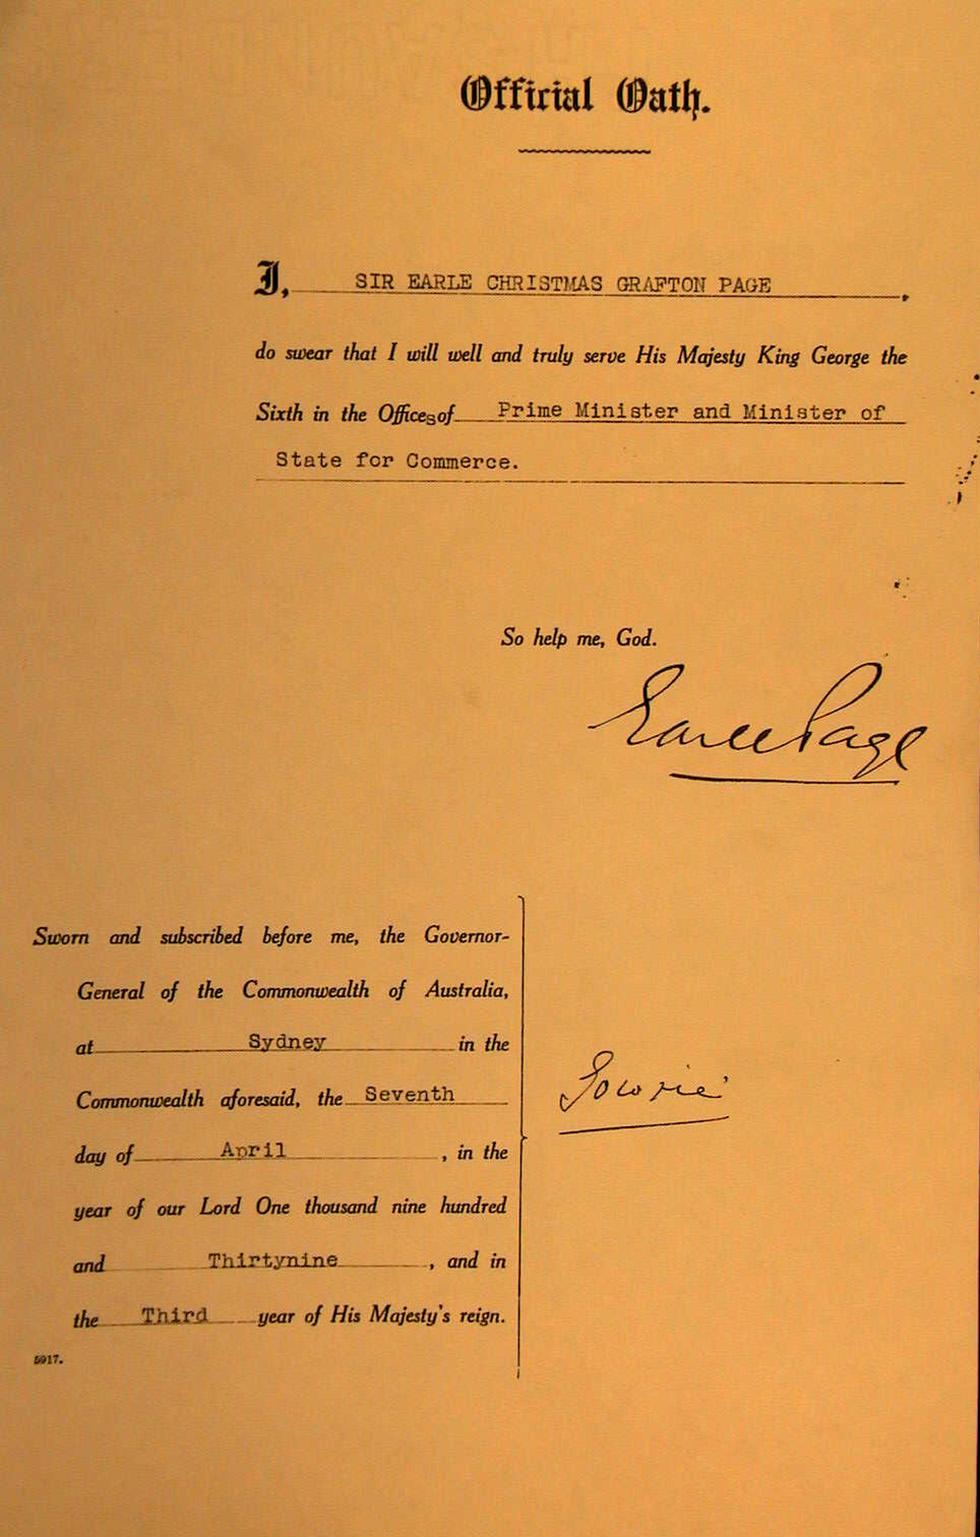 The Official Oath of Country Party leader Earle Page. 